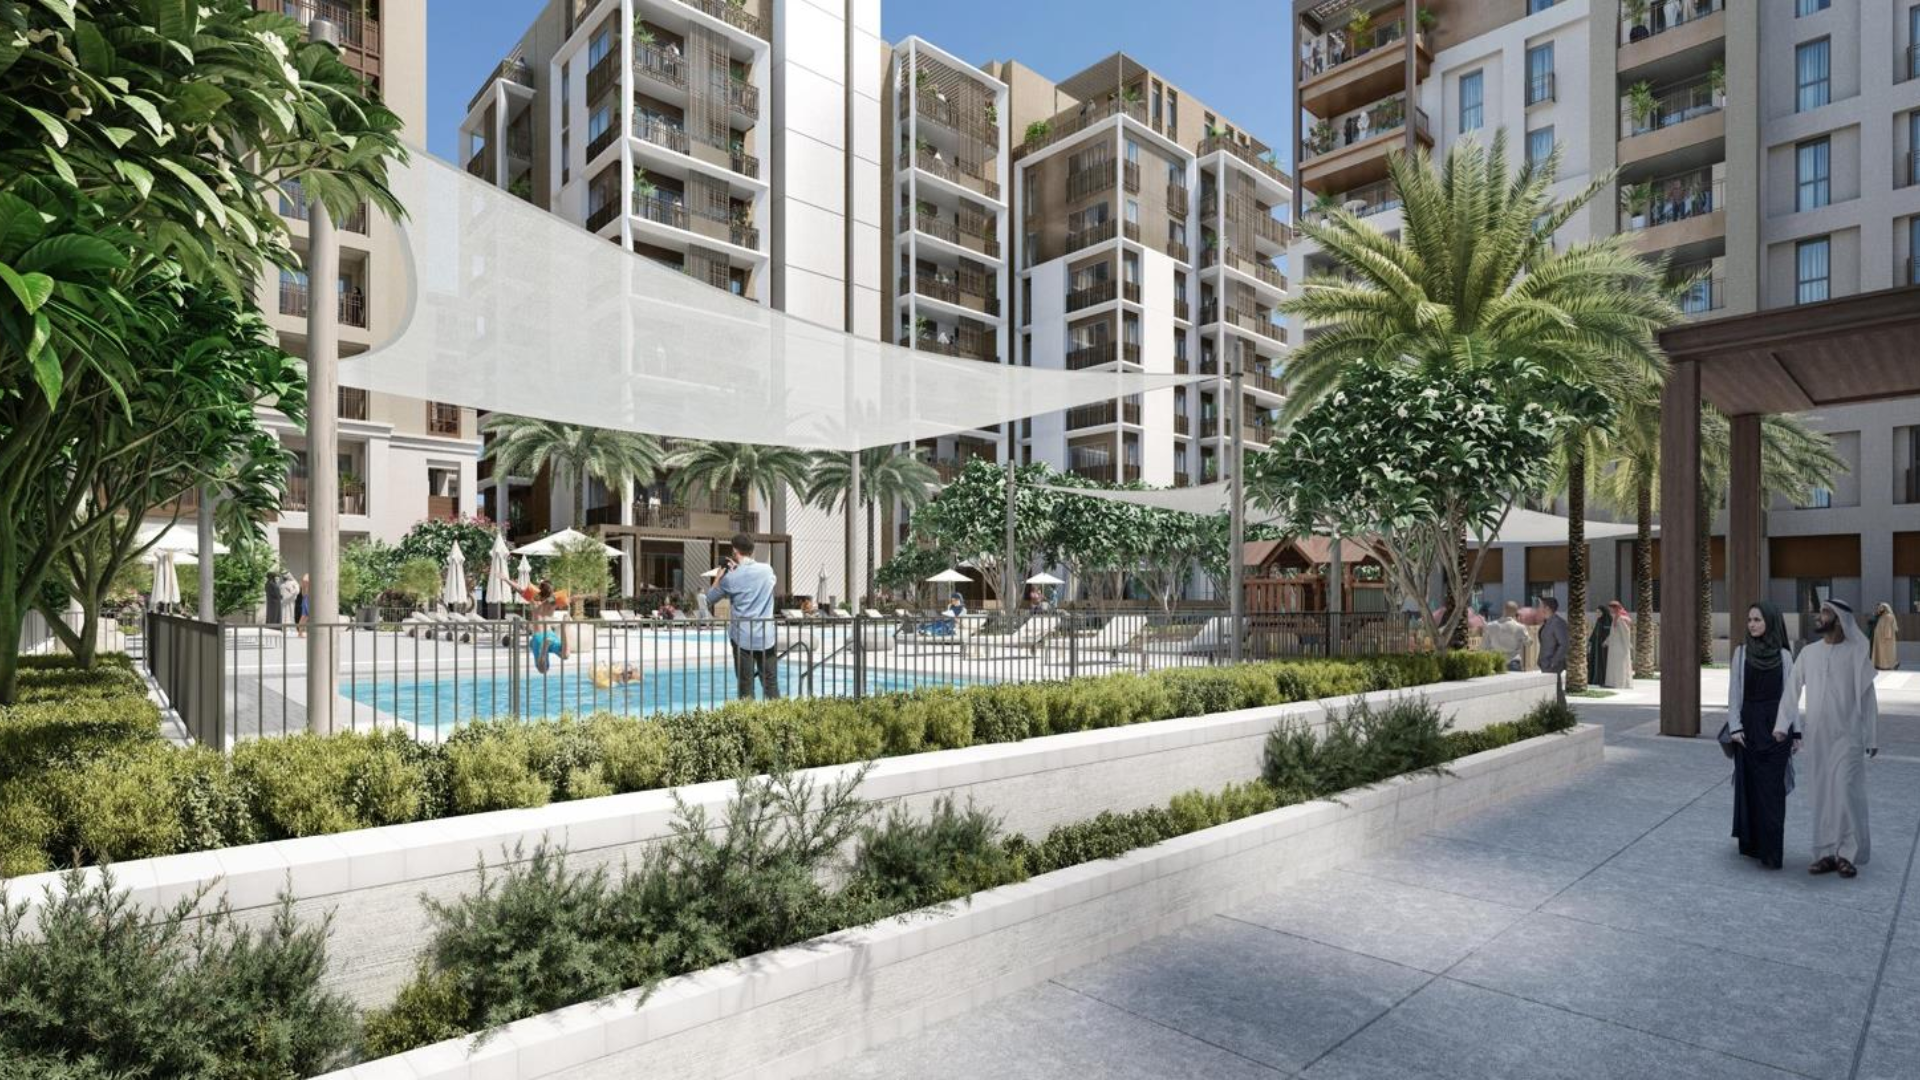 1 Bedroom Apartment For Sale Grove At Creek Beach Lp09983 1106fc5e3b141500.png